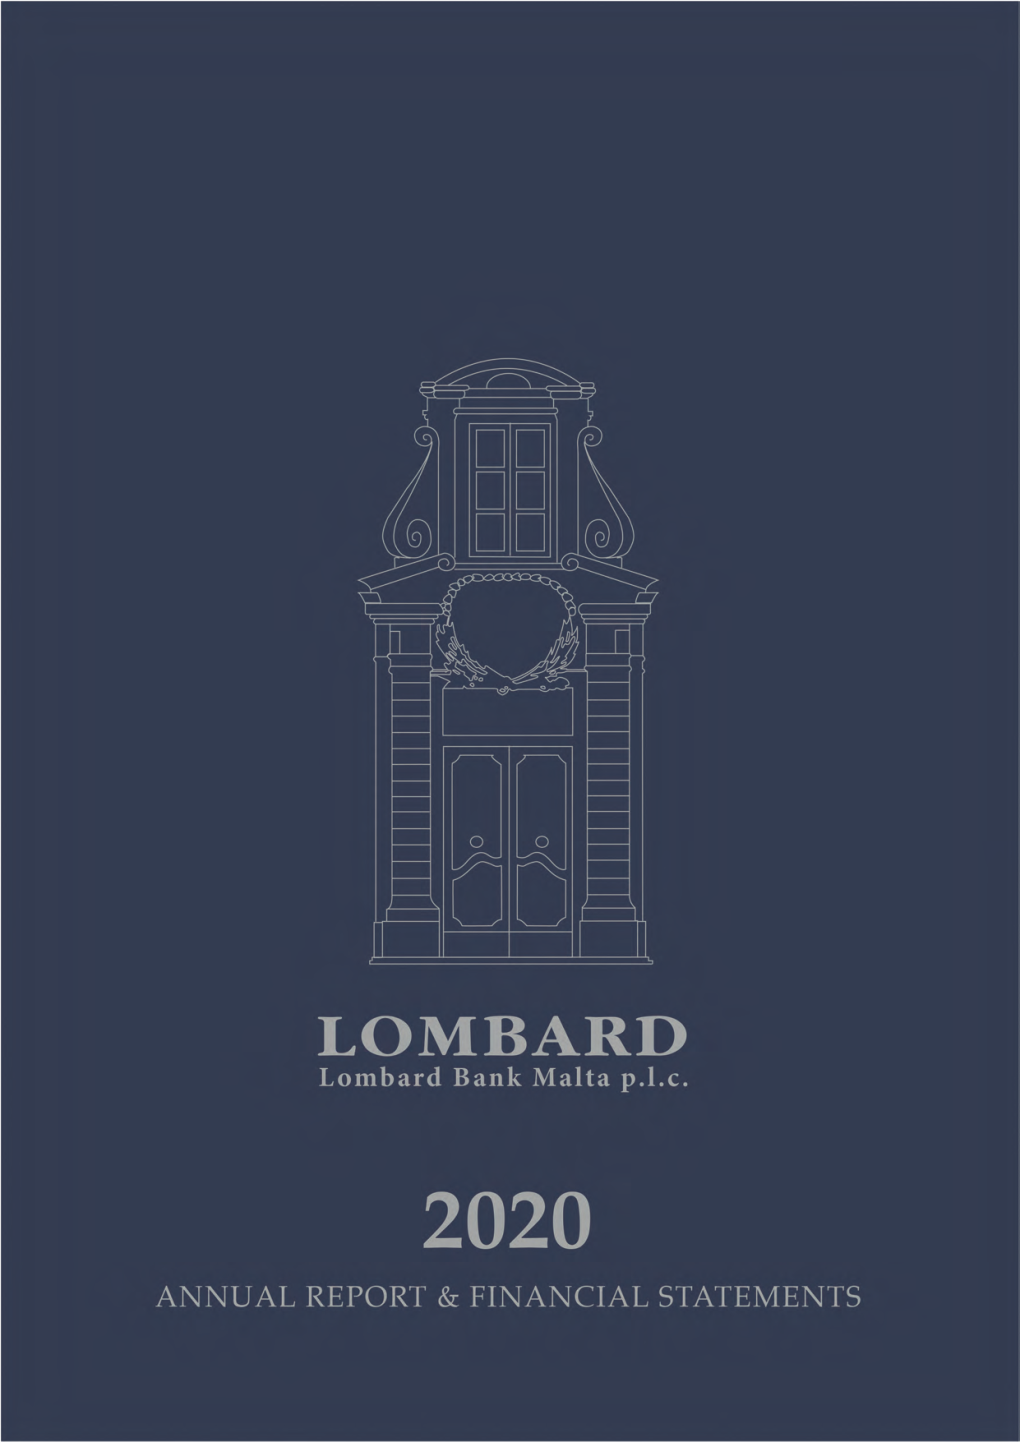 2020 Annual Report & Financial Statements